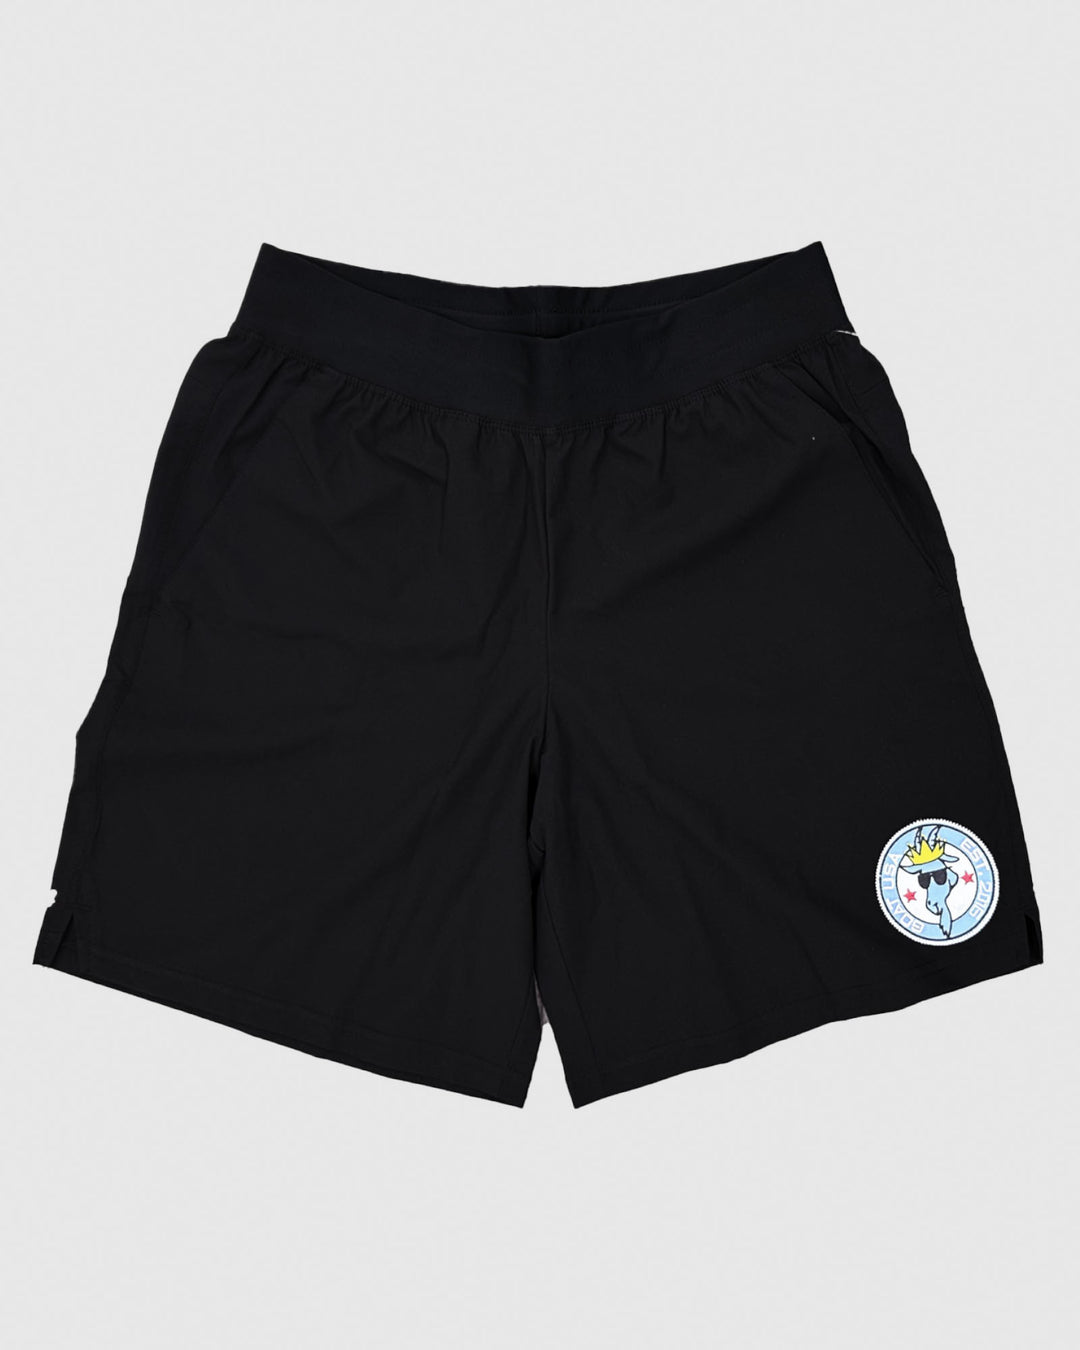 Black athletic shorts with goat patch